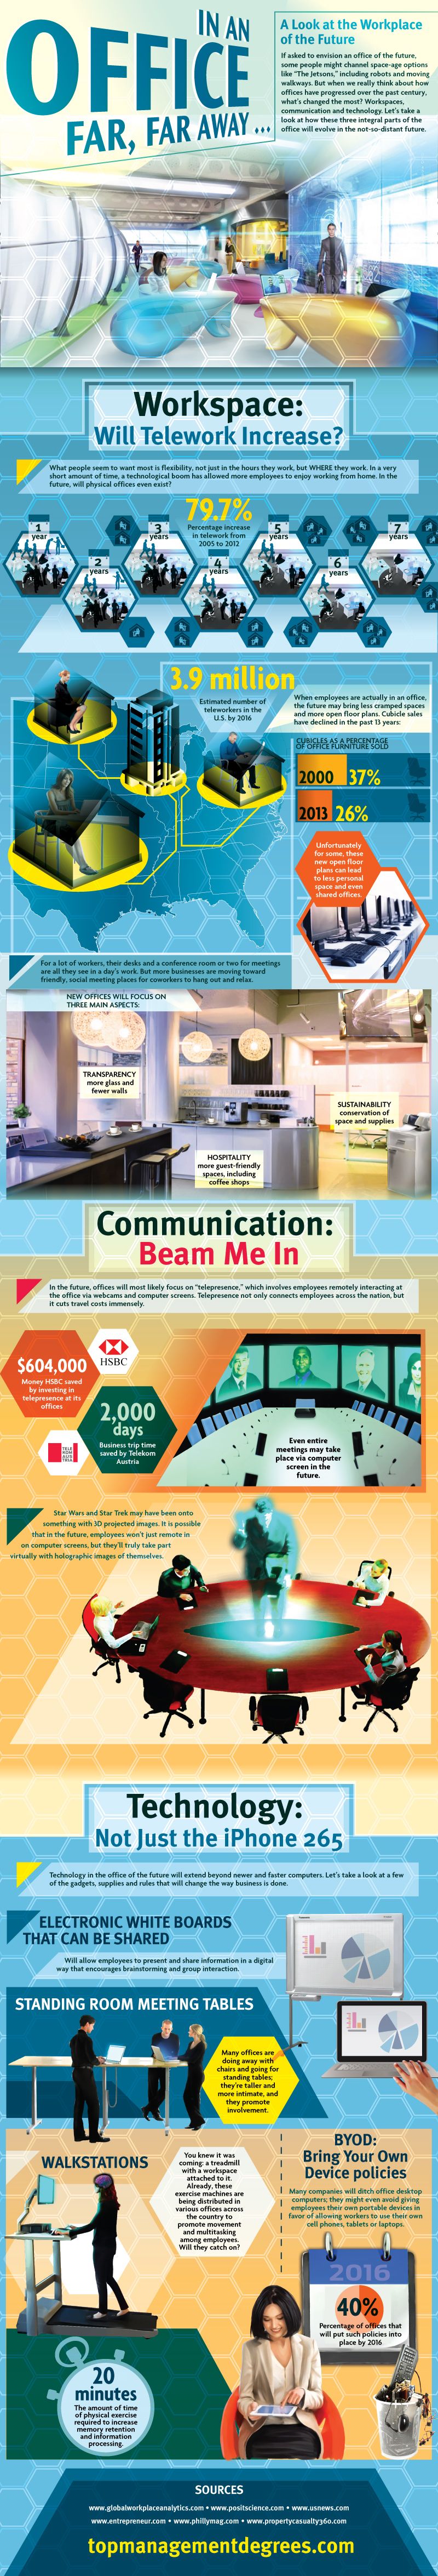 A Look at the Workplace of the Future [Infographic]